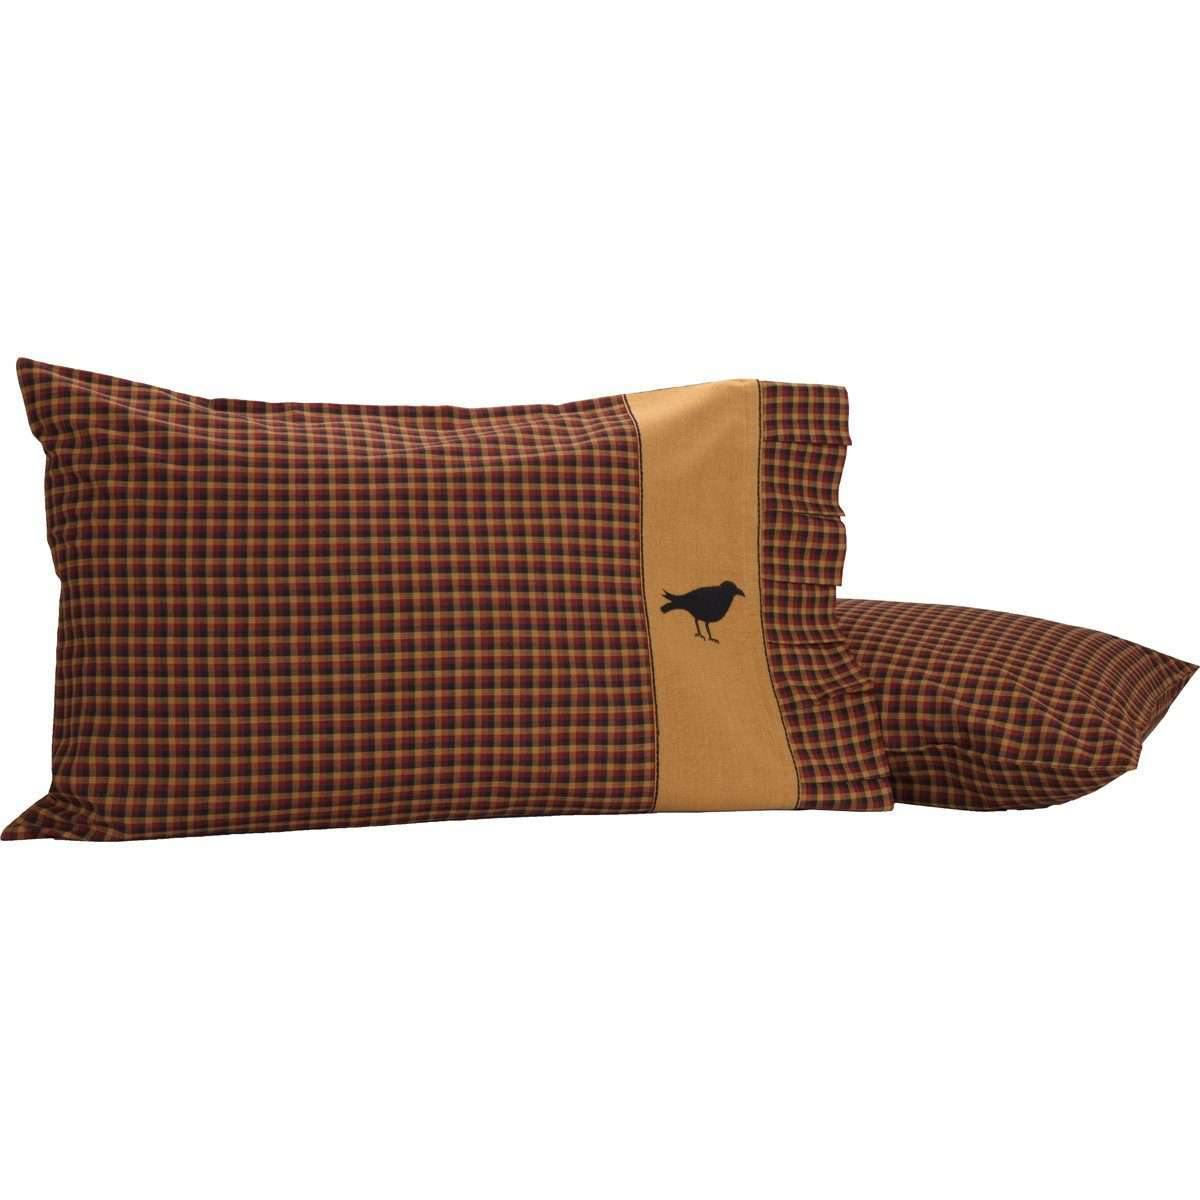 Heritage Farms Crow Standard Pillow Case Set of 2 21x30 VHC Brands - The Fox Decor